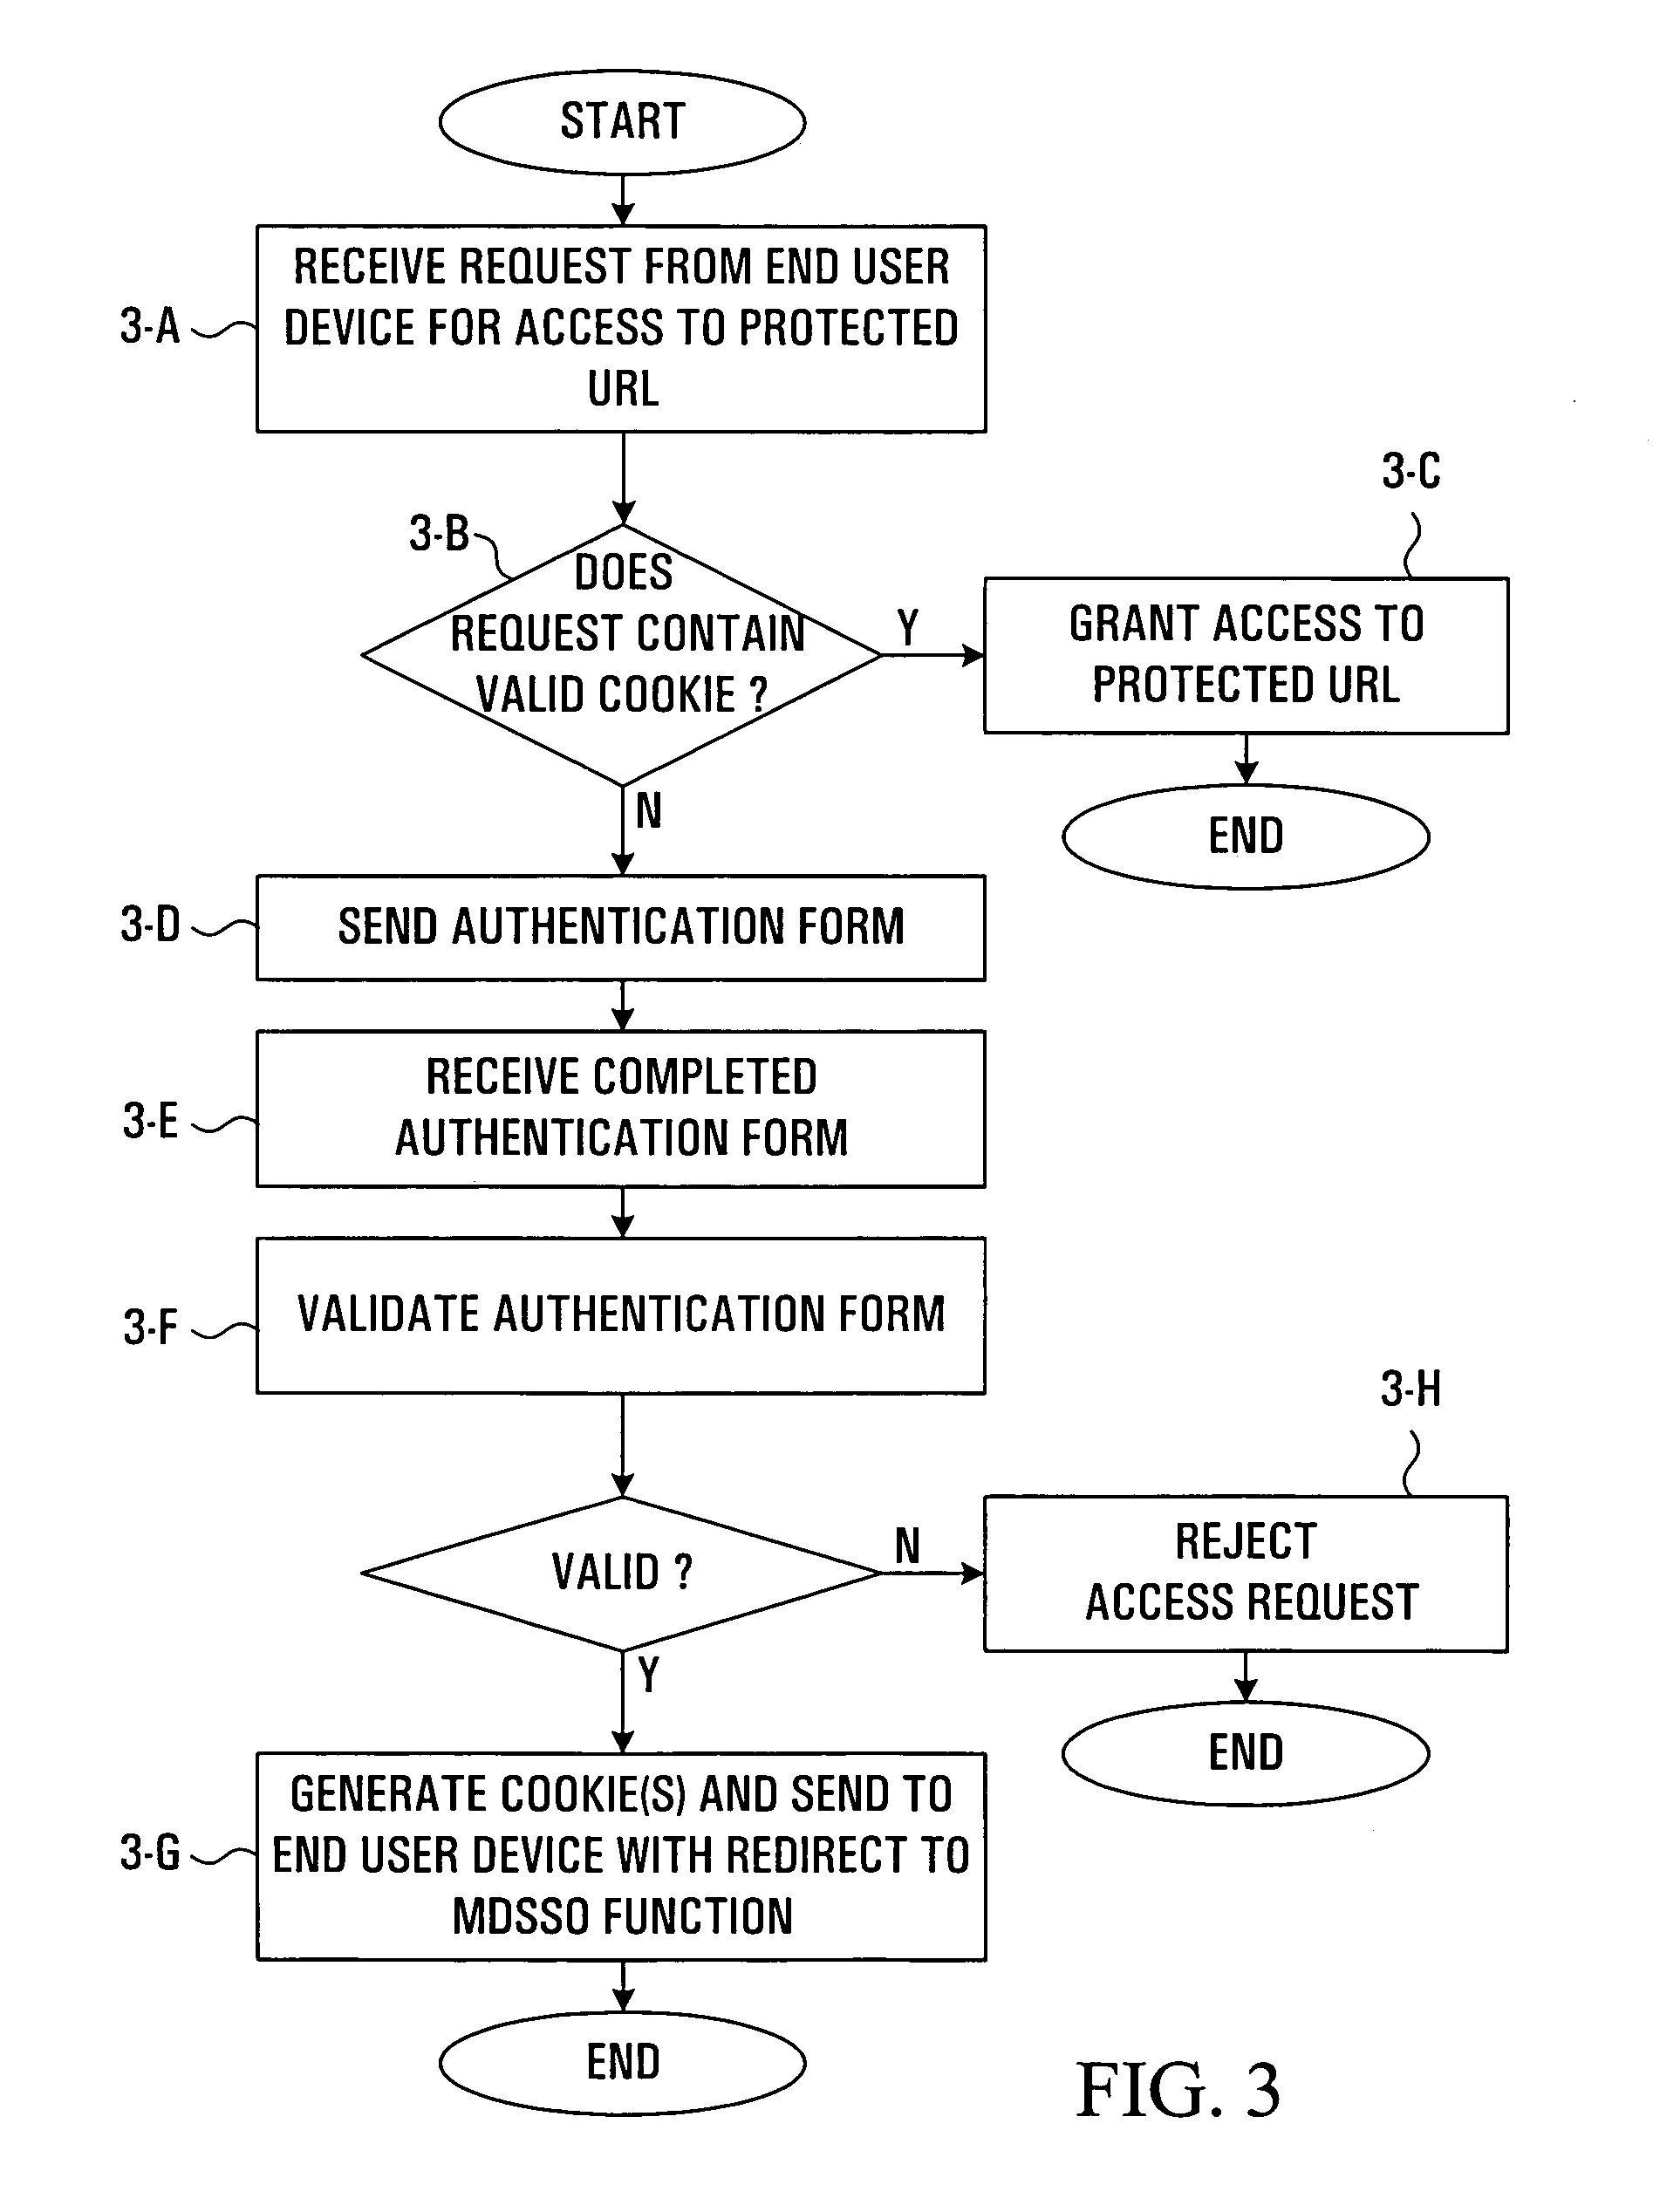 Systems and methods providing interactions between multiple servers and an end use device